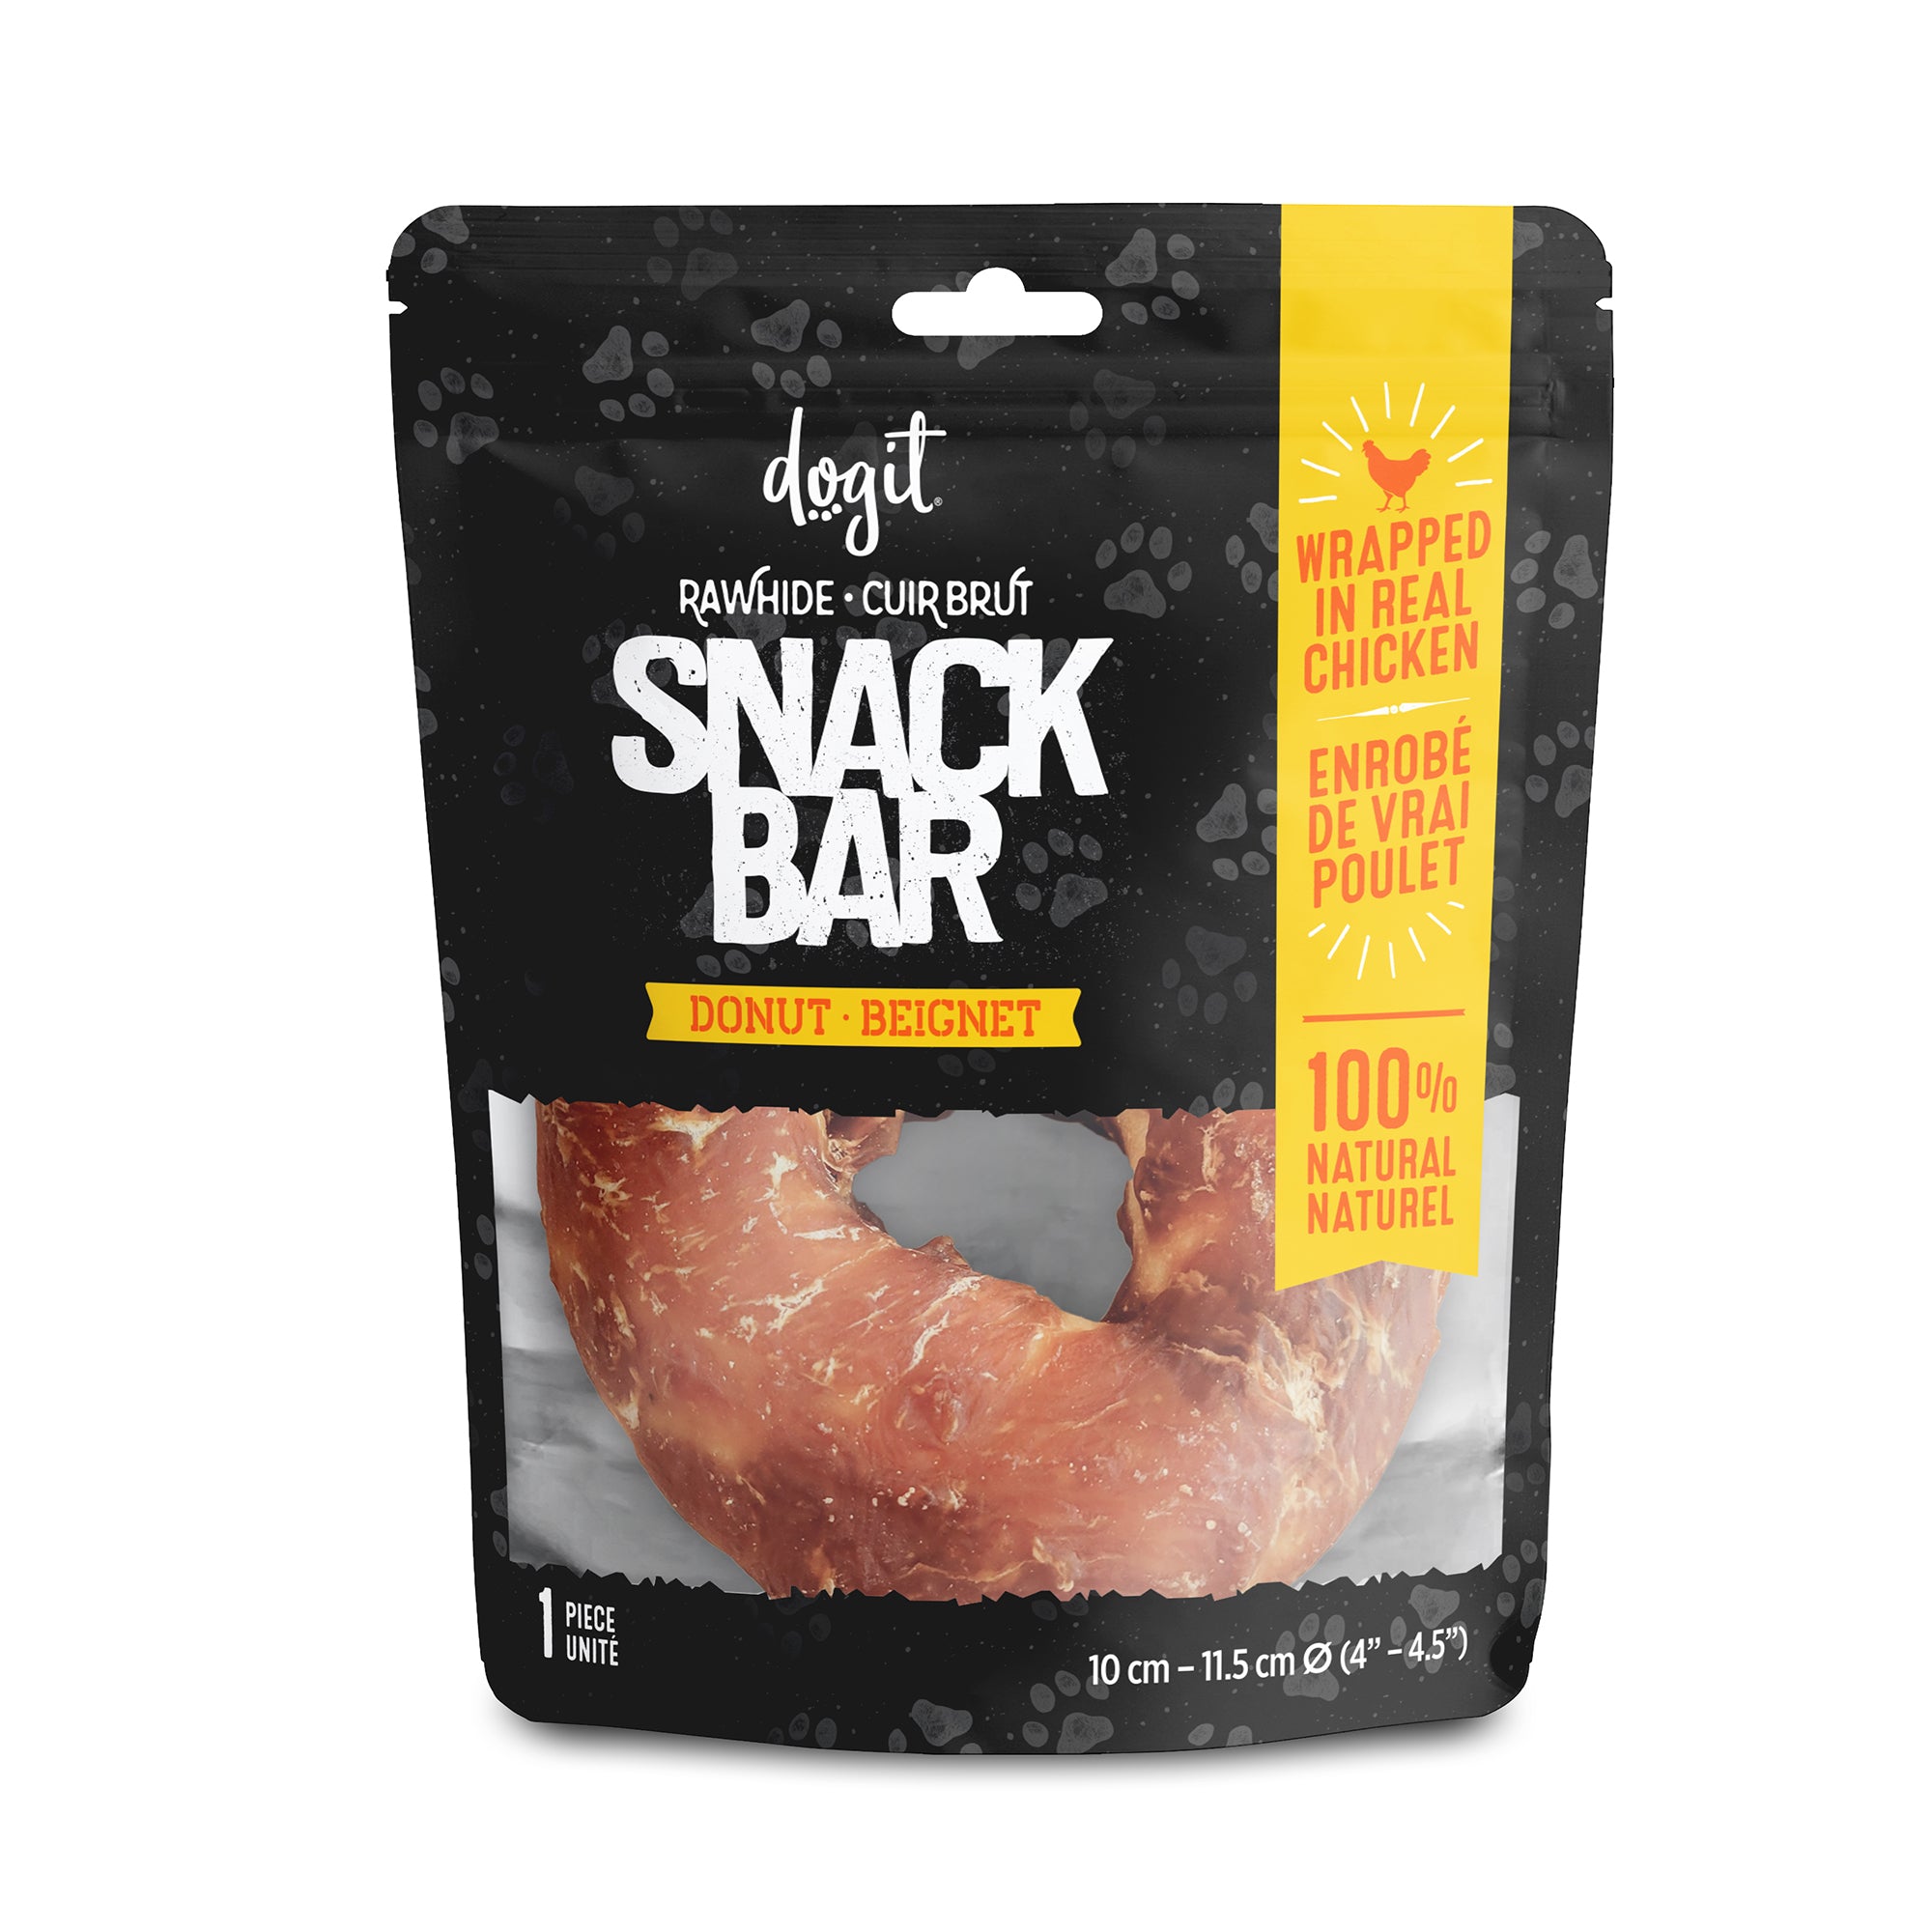 Dogit Snack Bar Rawhide - Chicken-Wrapped Donut - 1 pc (10 - 11.4 cm/4 - 4.5 in dia.)